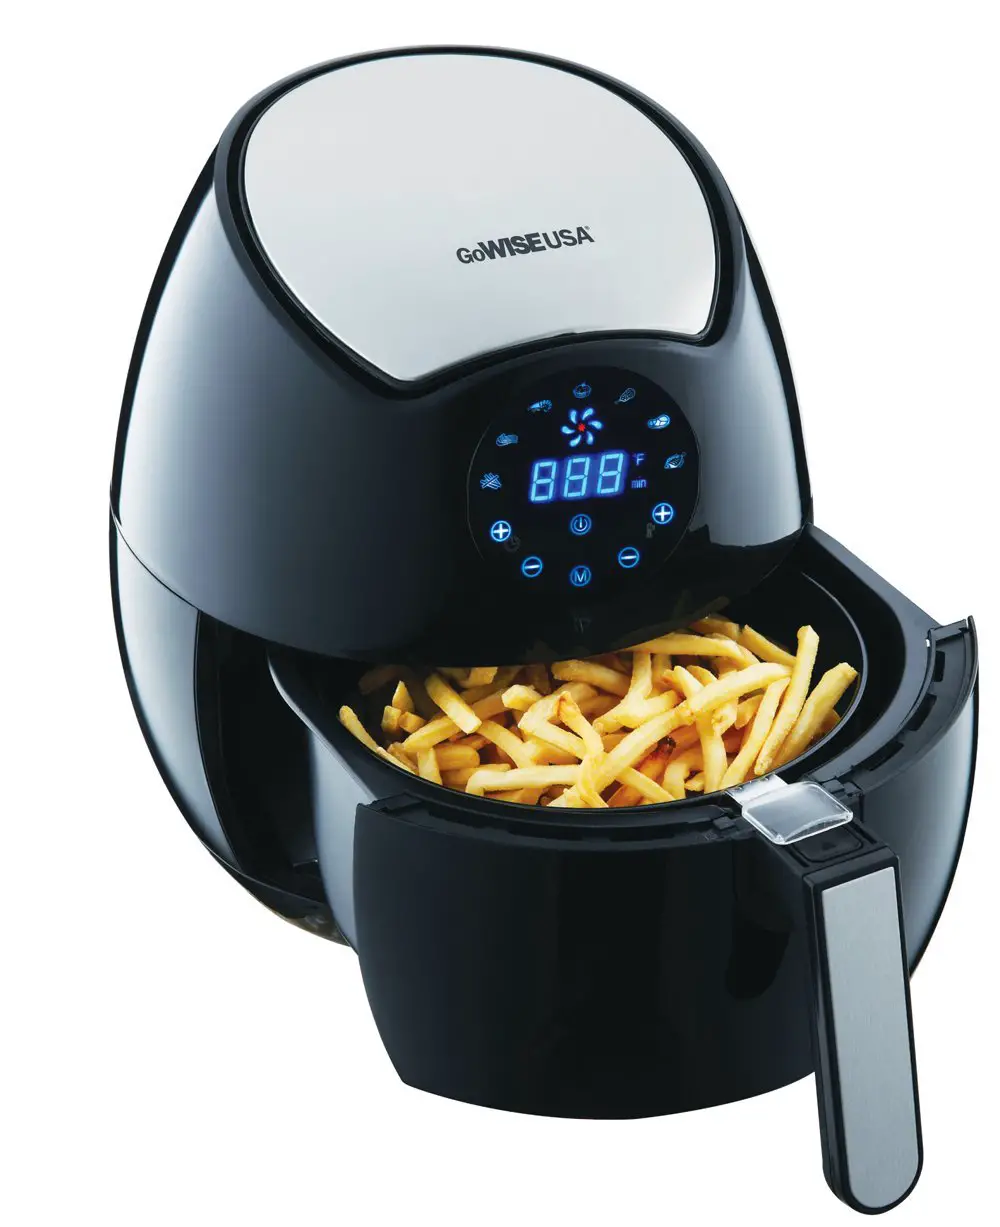 Air Fryer Price: How much and is it worth it?